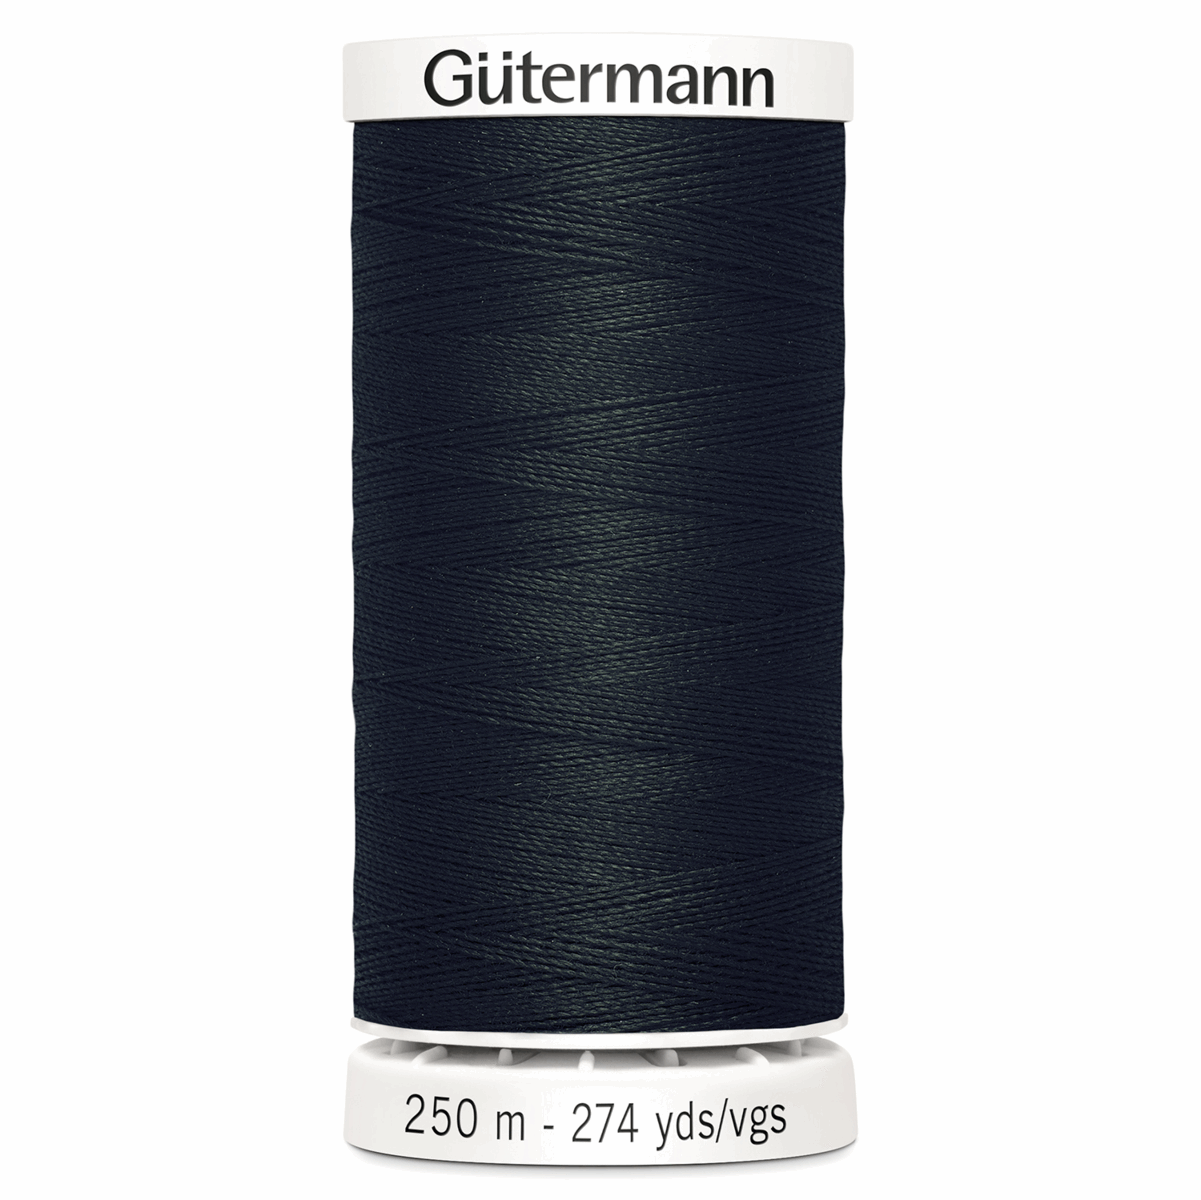 250m size Gutermann Sew-All Thread in BLACK from Jaycotts Sewing Supplies